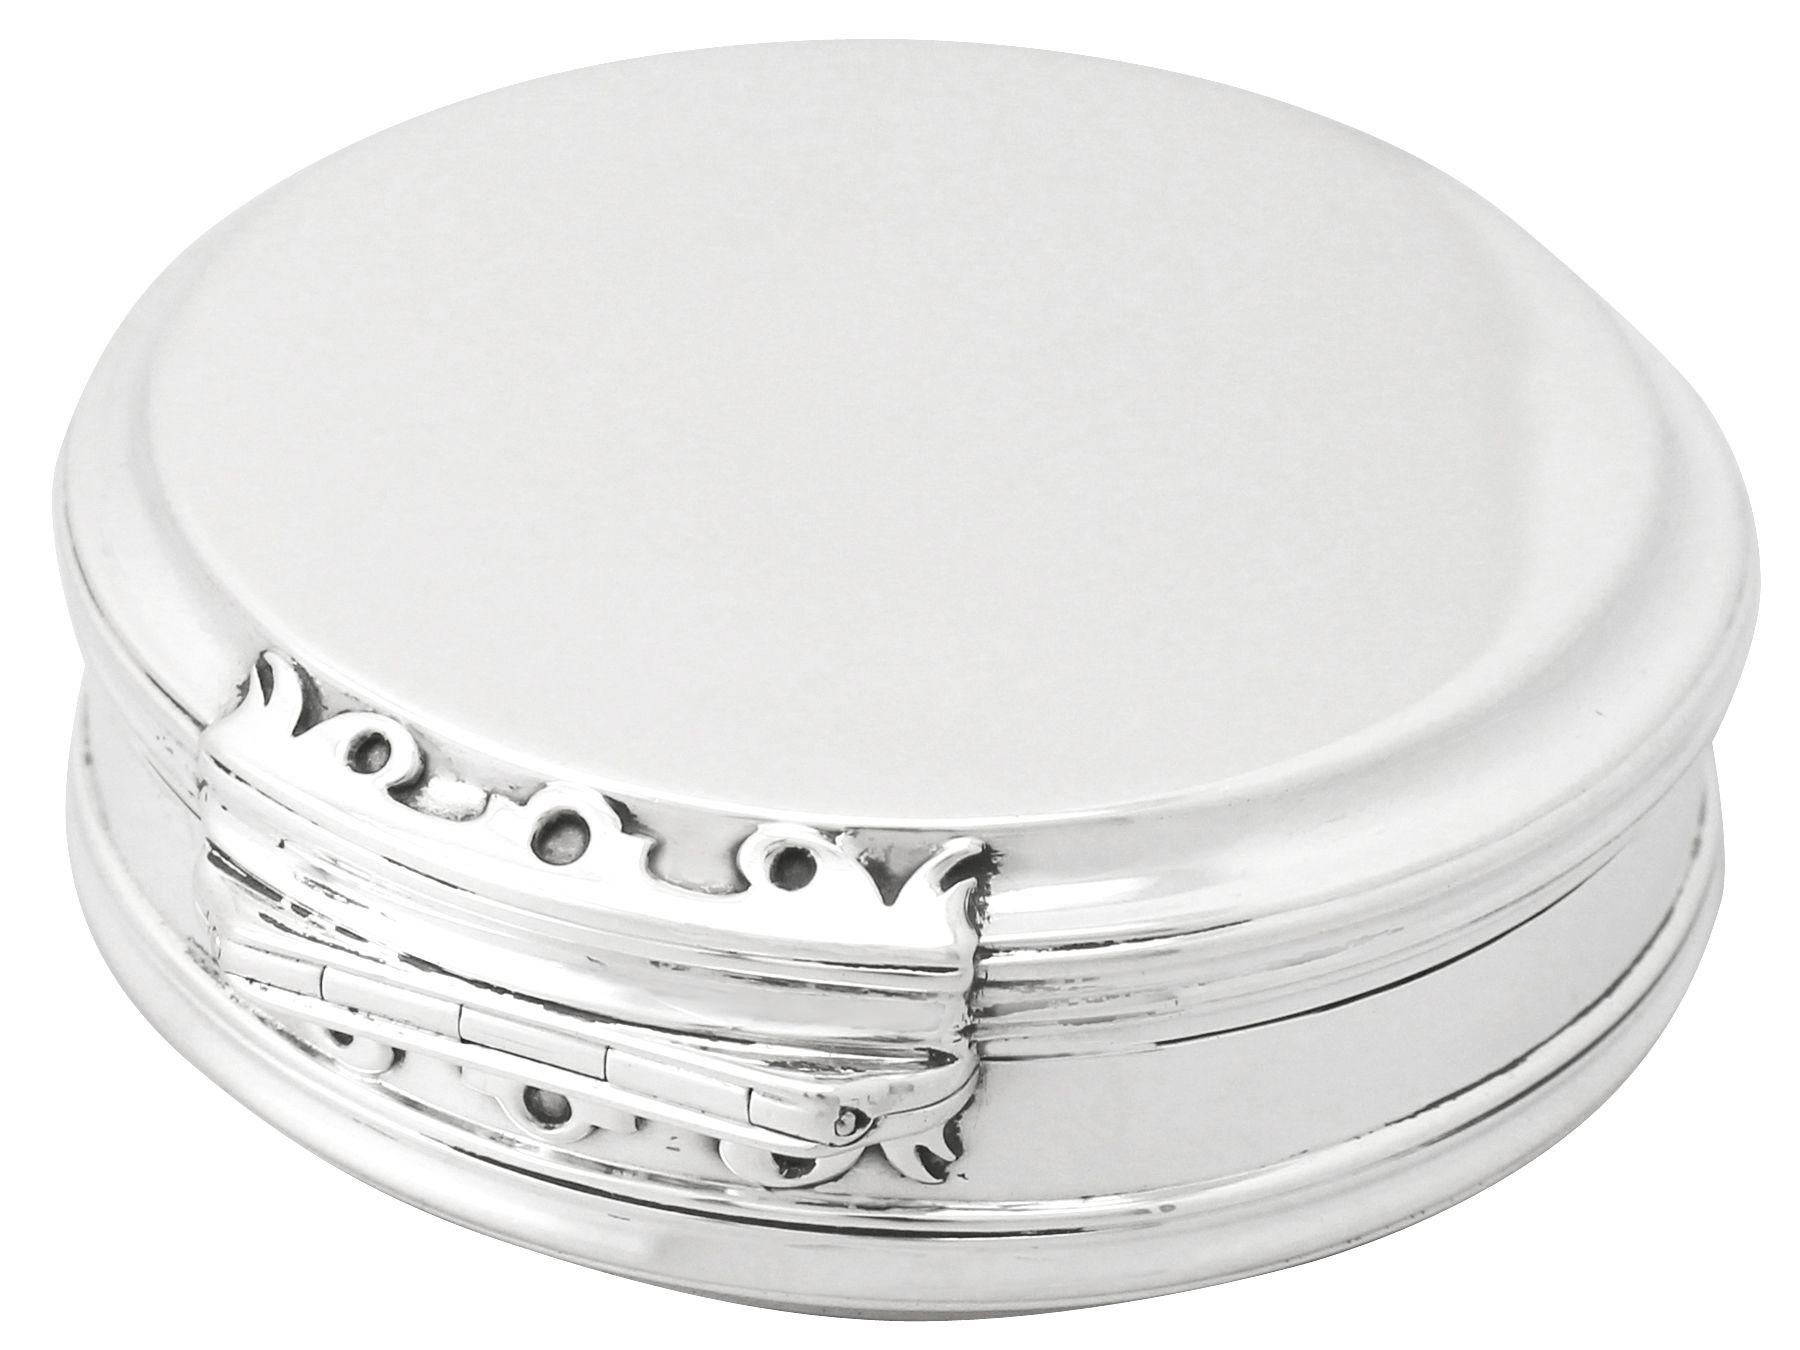 An exceptional, fine and impressive antique George V English sterling silver box made in the George I style, an addition to our ornamental silverware collection.

This exceptional antique George V sterling silver box has a plain circular form in